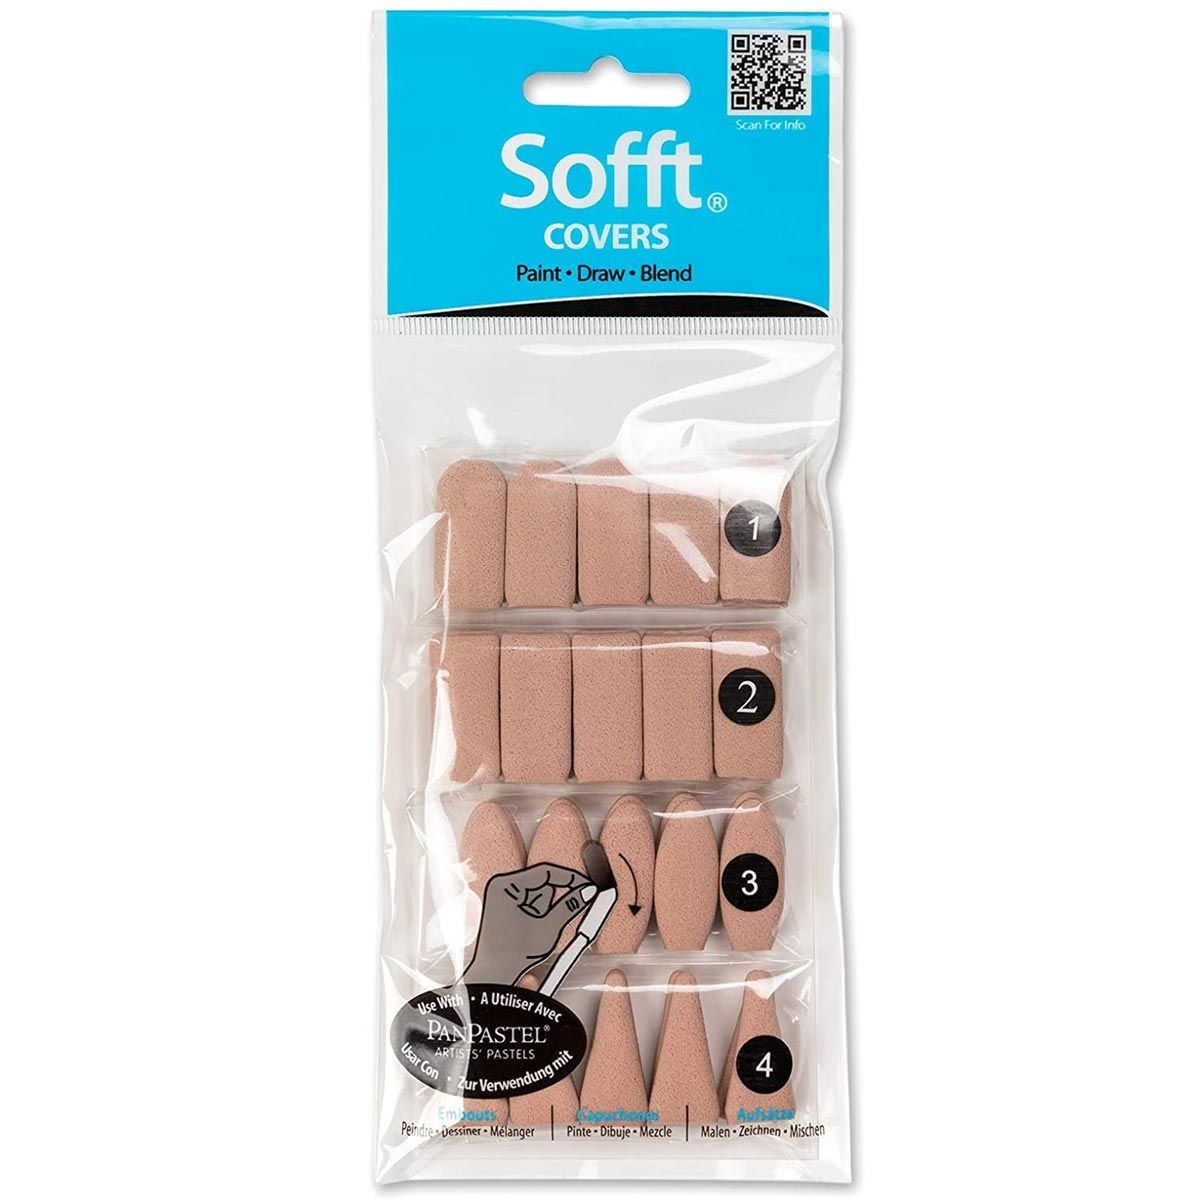 Sofft Tool Covers Pack of 40 Mixed 10 Round,10 Flat,10 Oval,10 Point